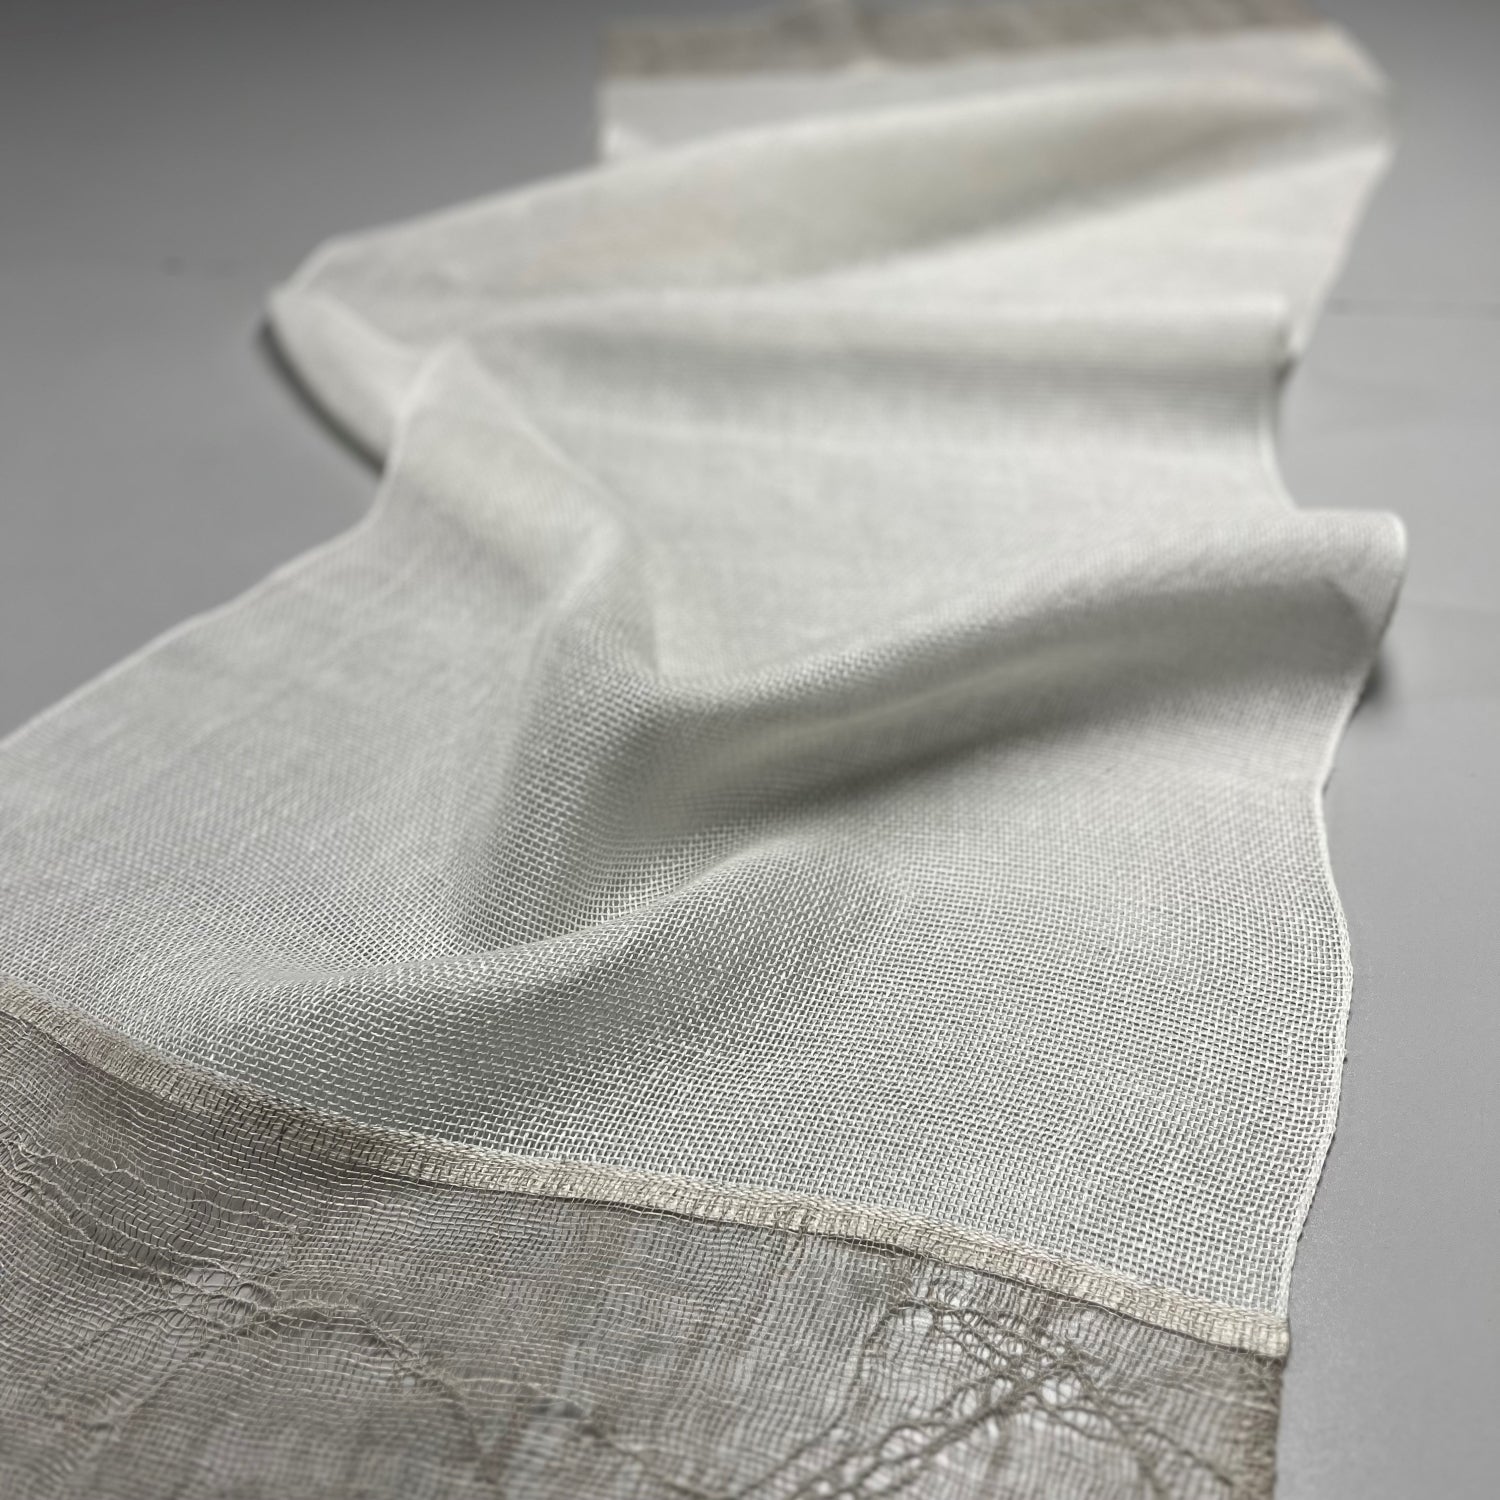 Handwoven linen table runner in white with decorative ends in natural color 50x140 cm